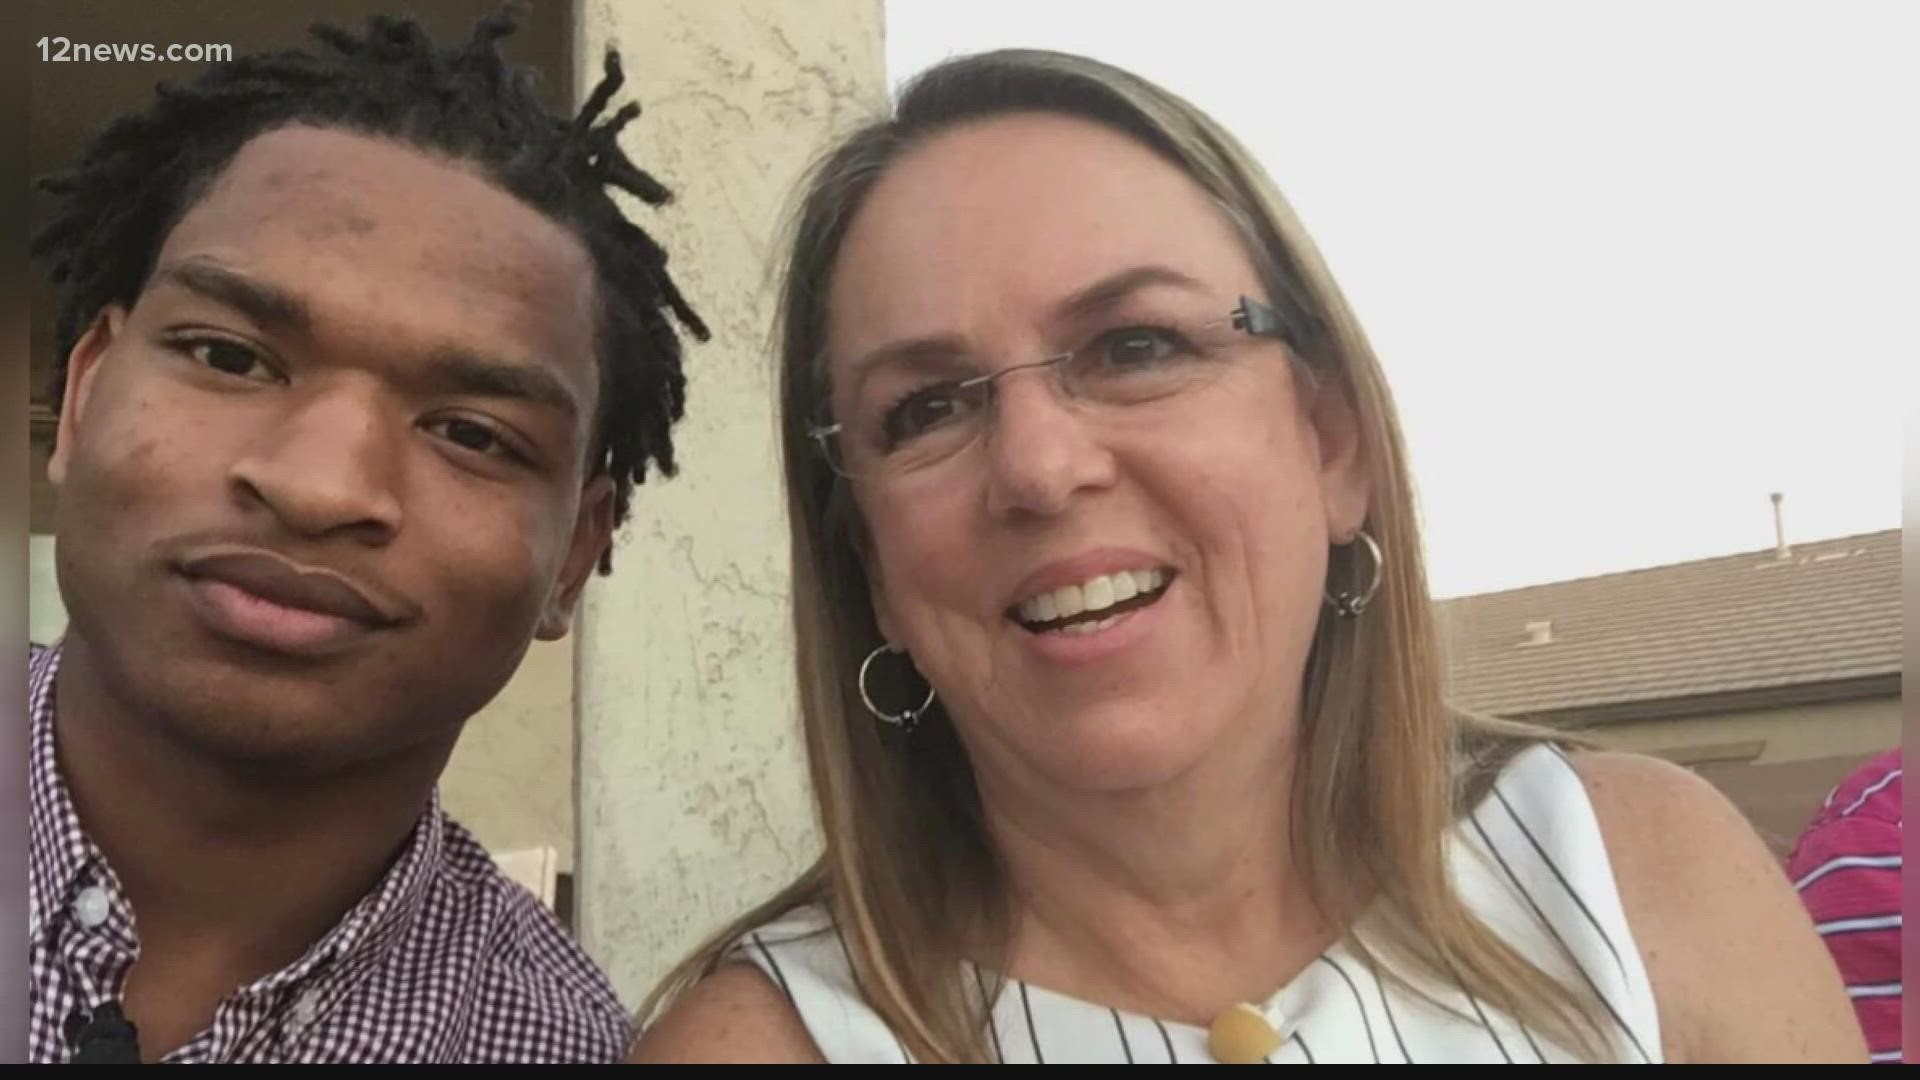 Wanda Dench and Jamal Hinton warmed hearts when an accidental text from Denton to Hinton ended in them spending Thanksgiving together.